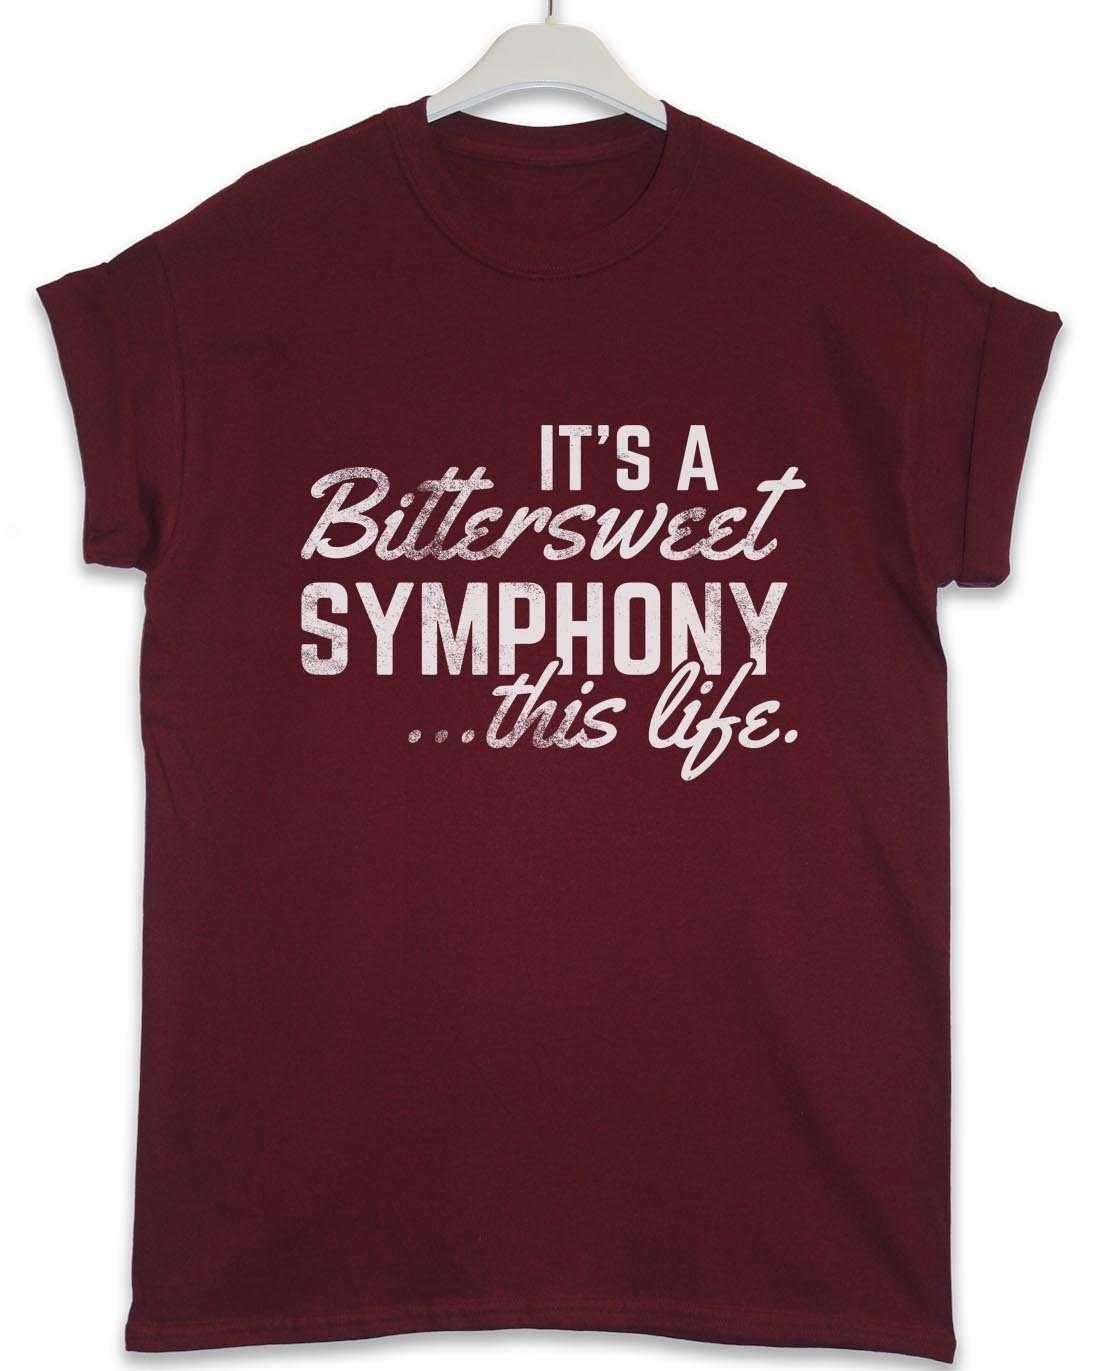 Bittersweet Symphony This Life Lyric Quote T-Shirt For Men 8Ball